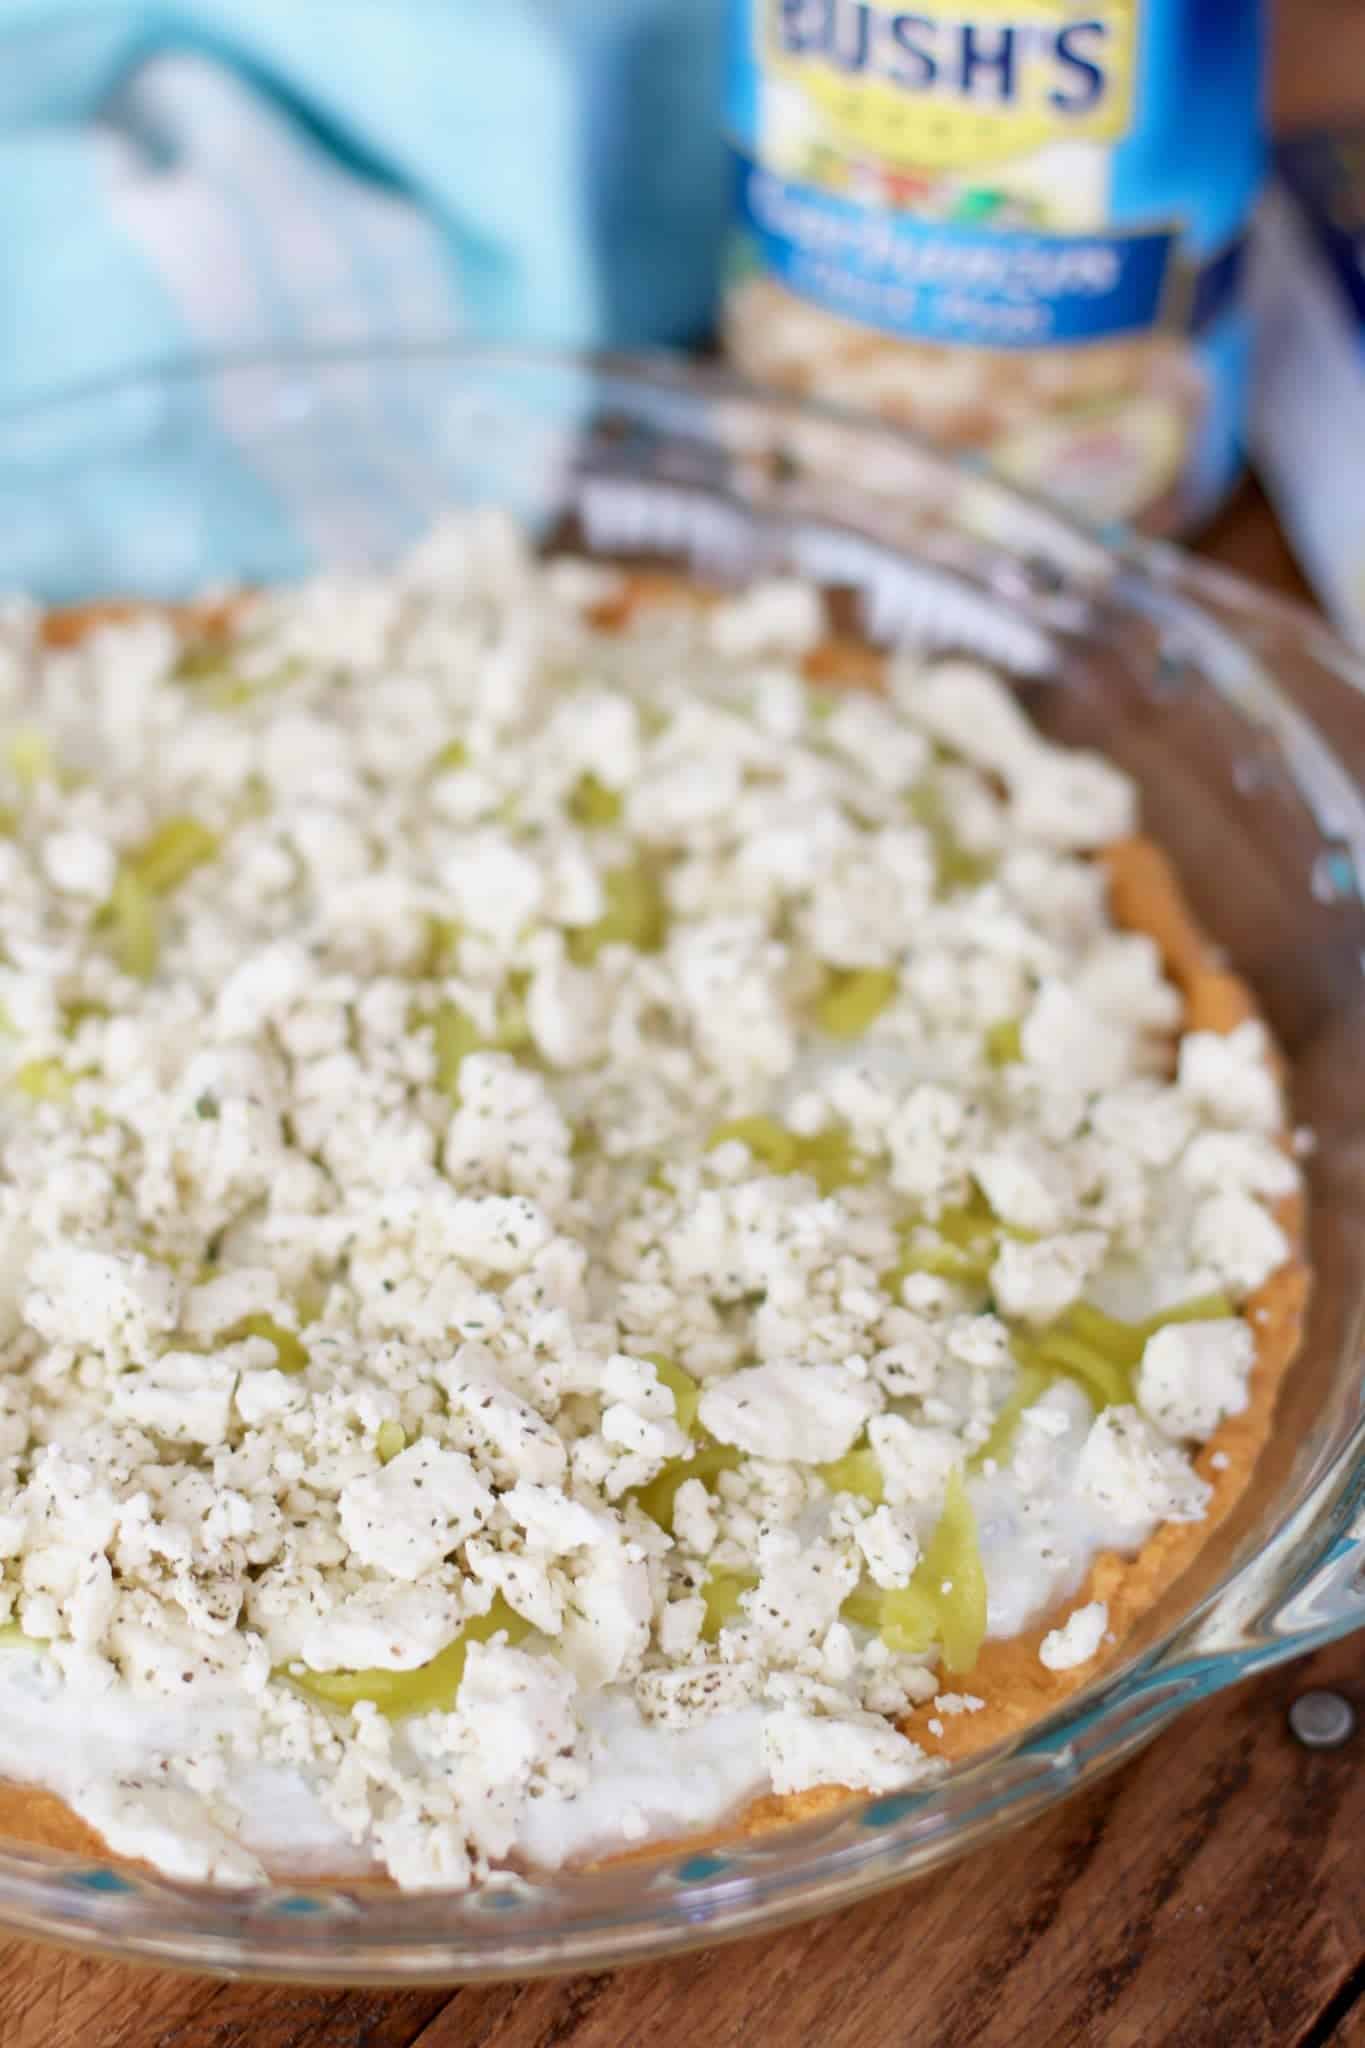 mediterranean Feta cheese crumbles added to dip layers.